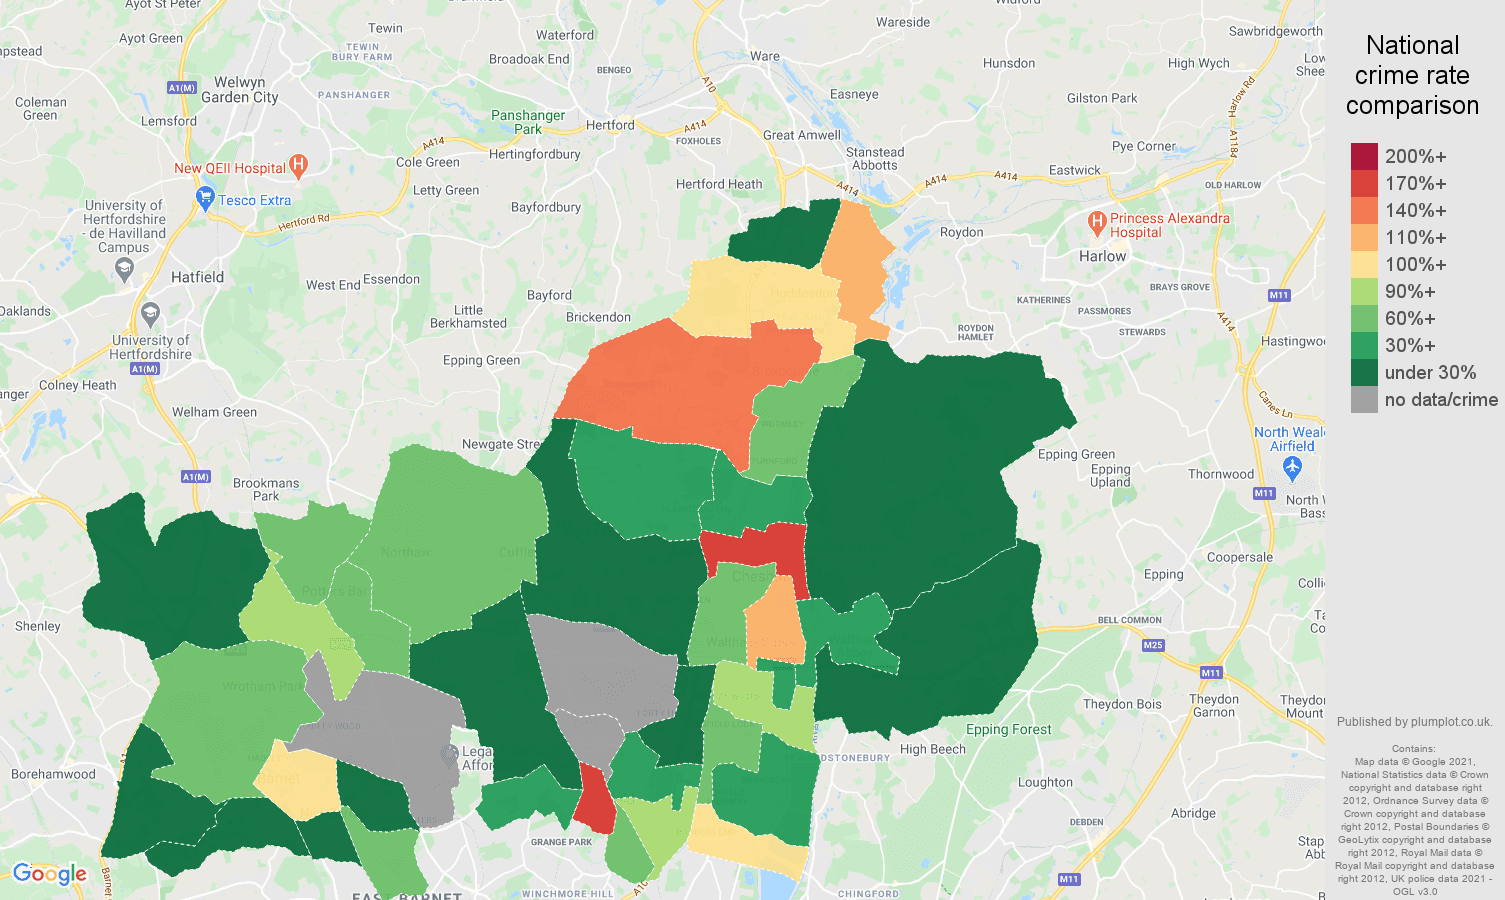 Enfield bicycle theft crime rate comparison map